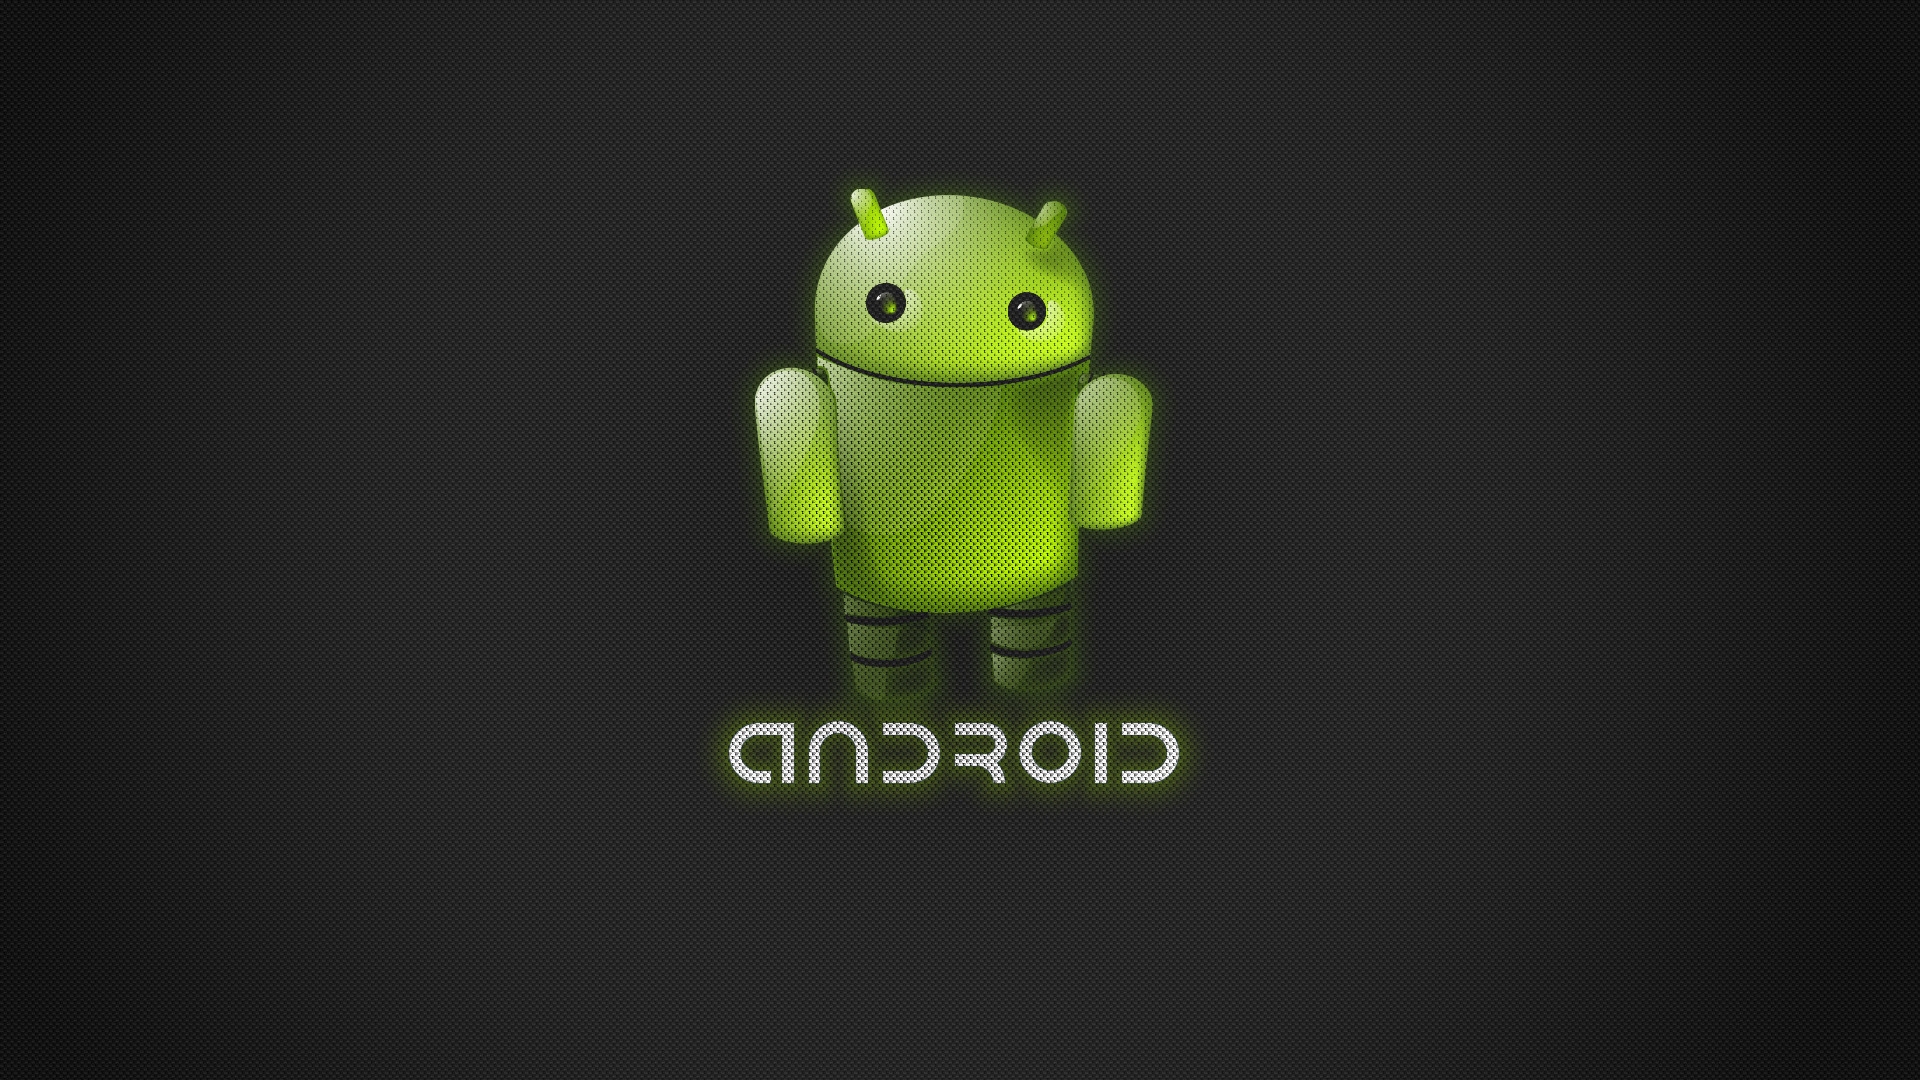 Android Desktop Pc And Mac Wallpaper